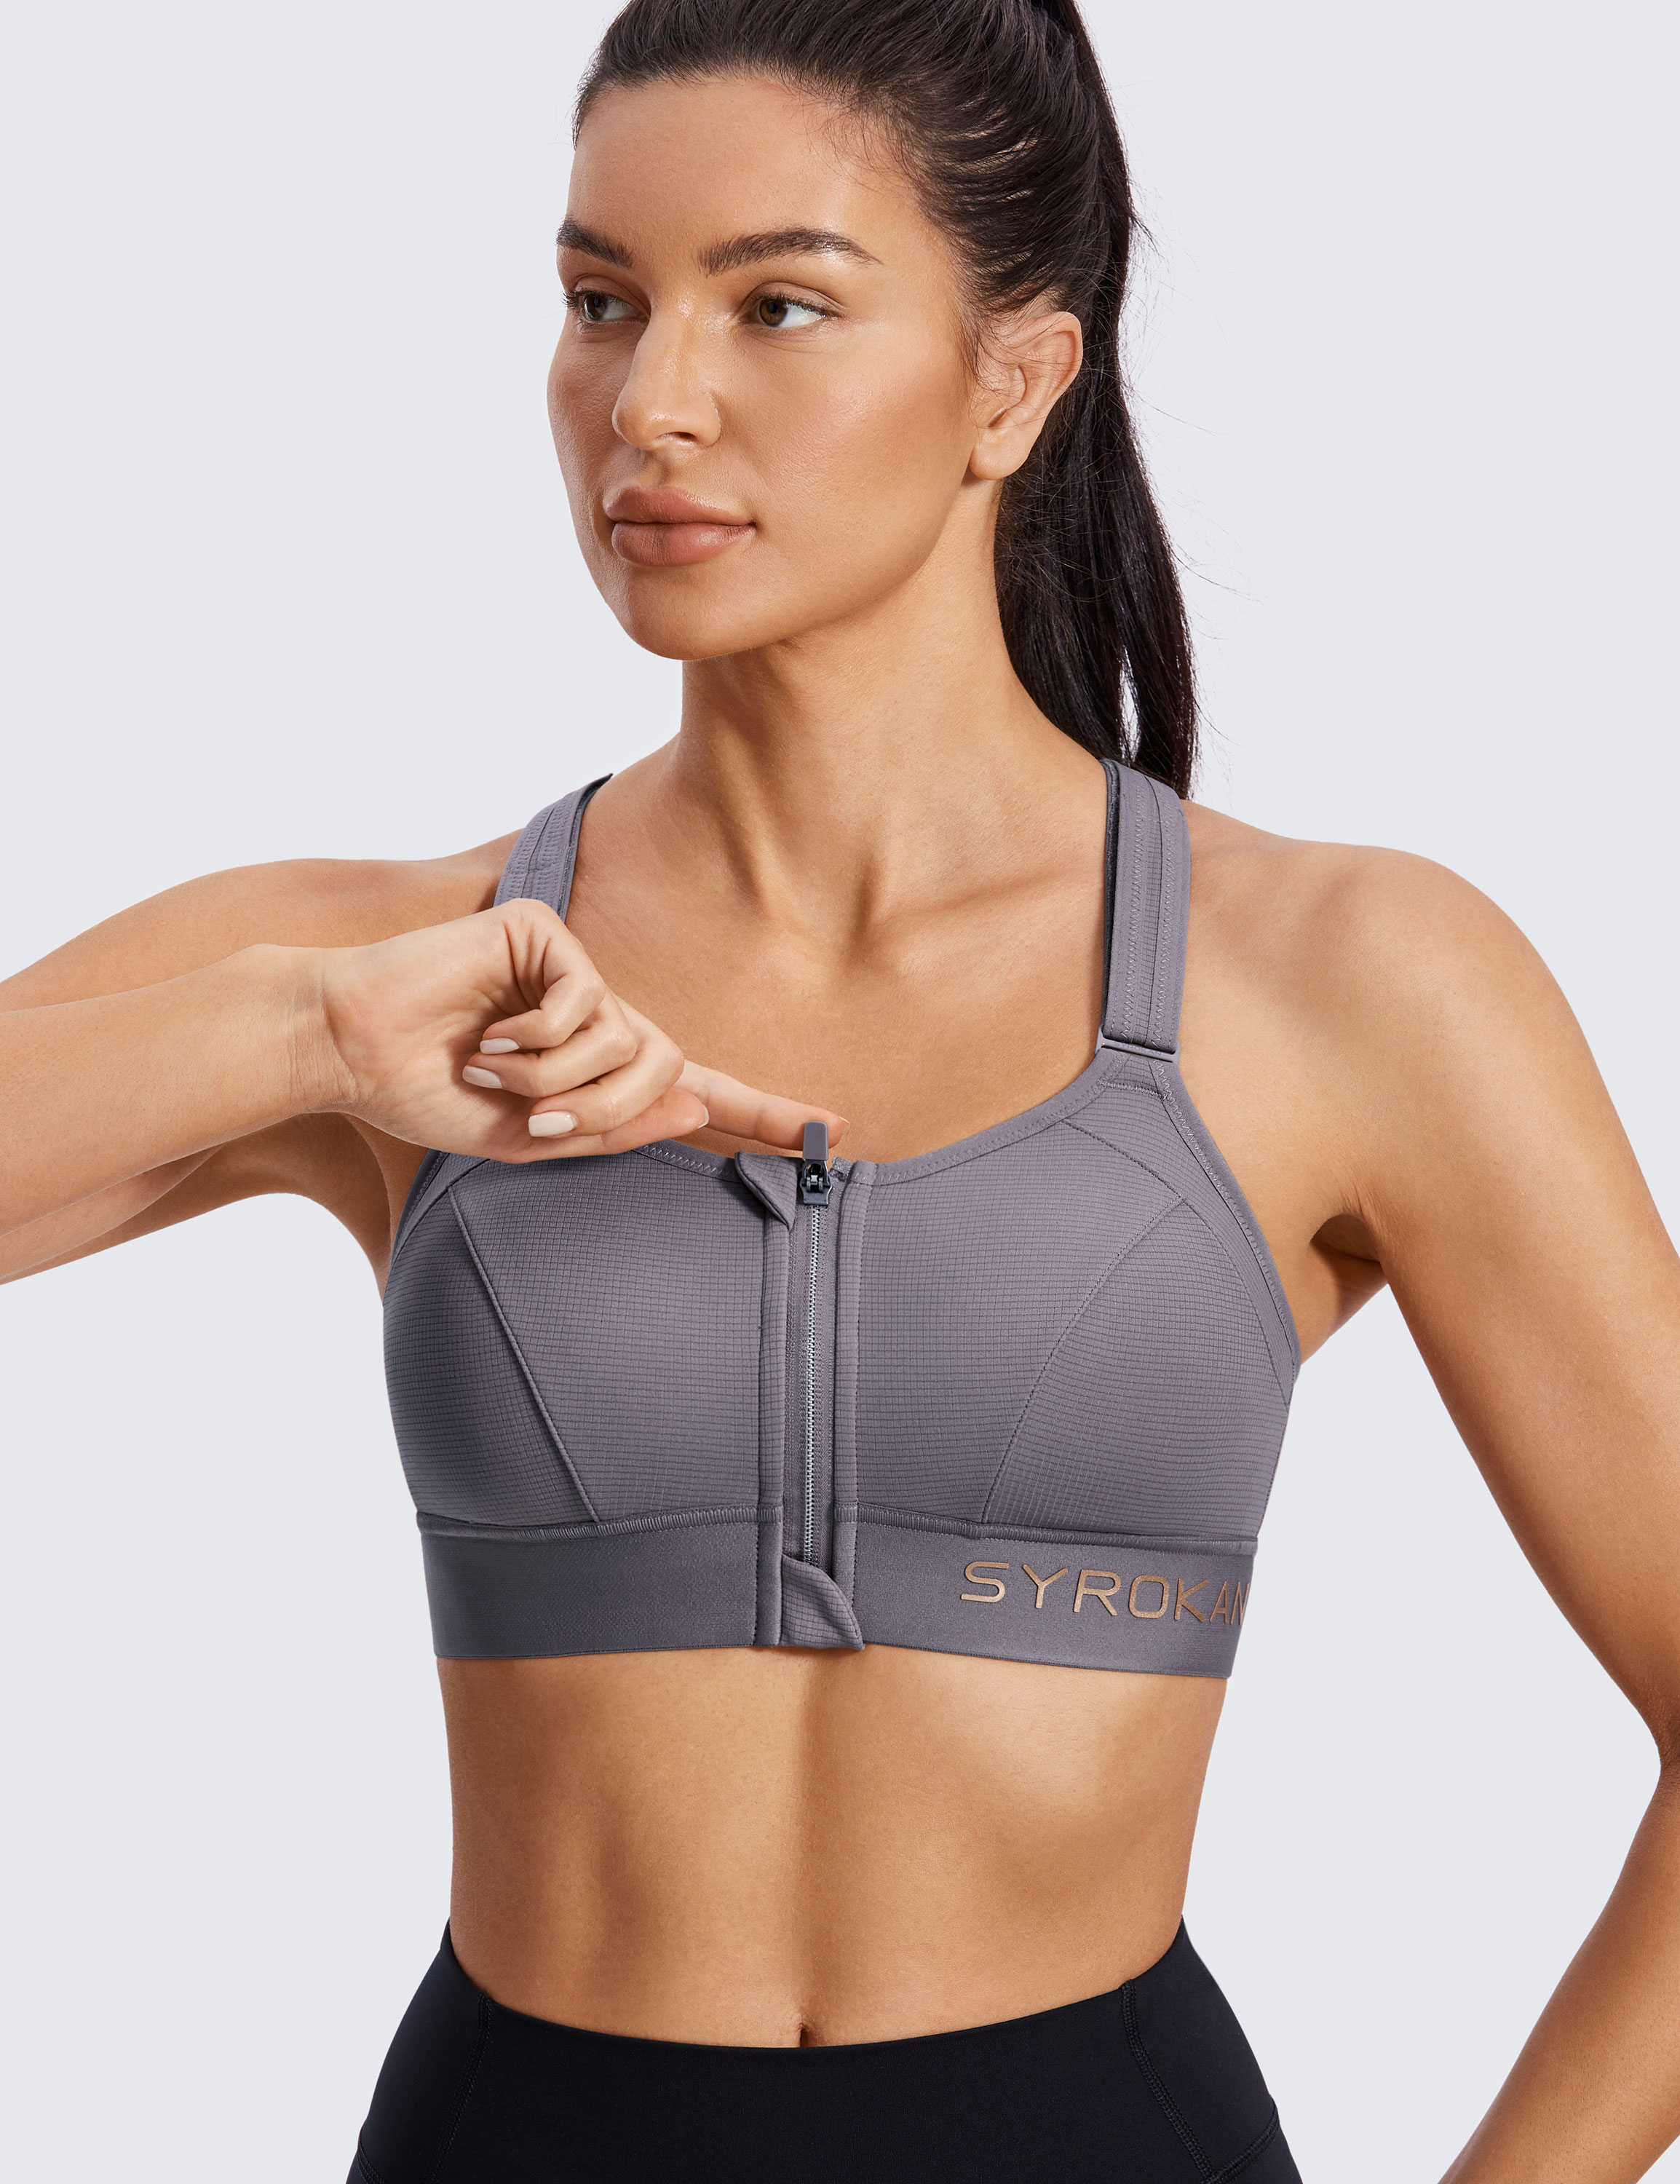 SYROKAN Womens High Impact Zipper Zip Front Sports Bra With Non Padded Wire  And X Back From Jiangzeming, $16.4